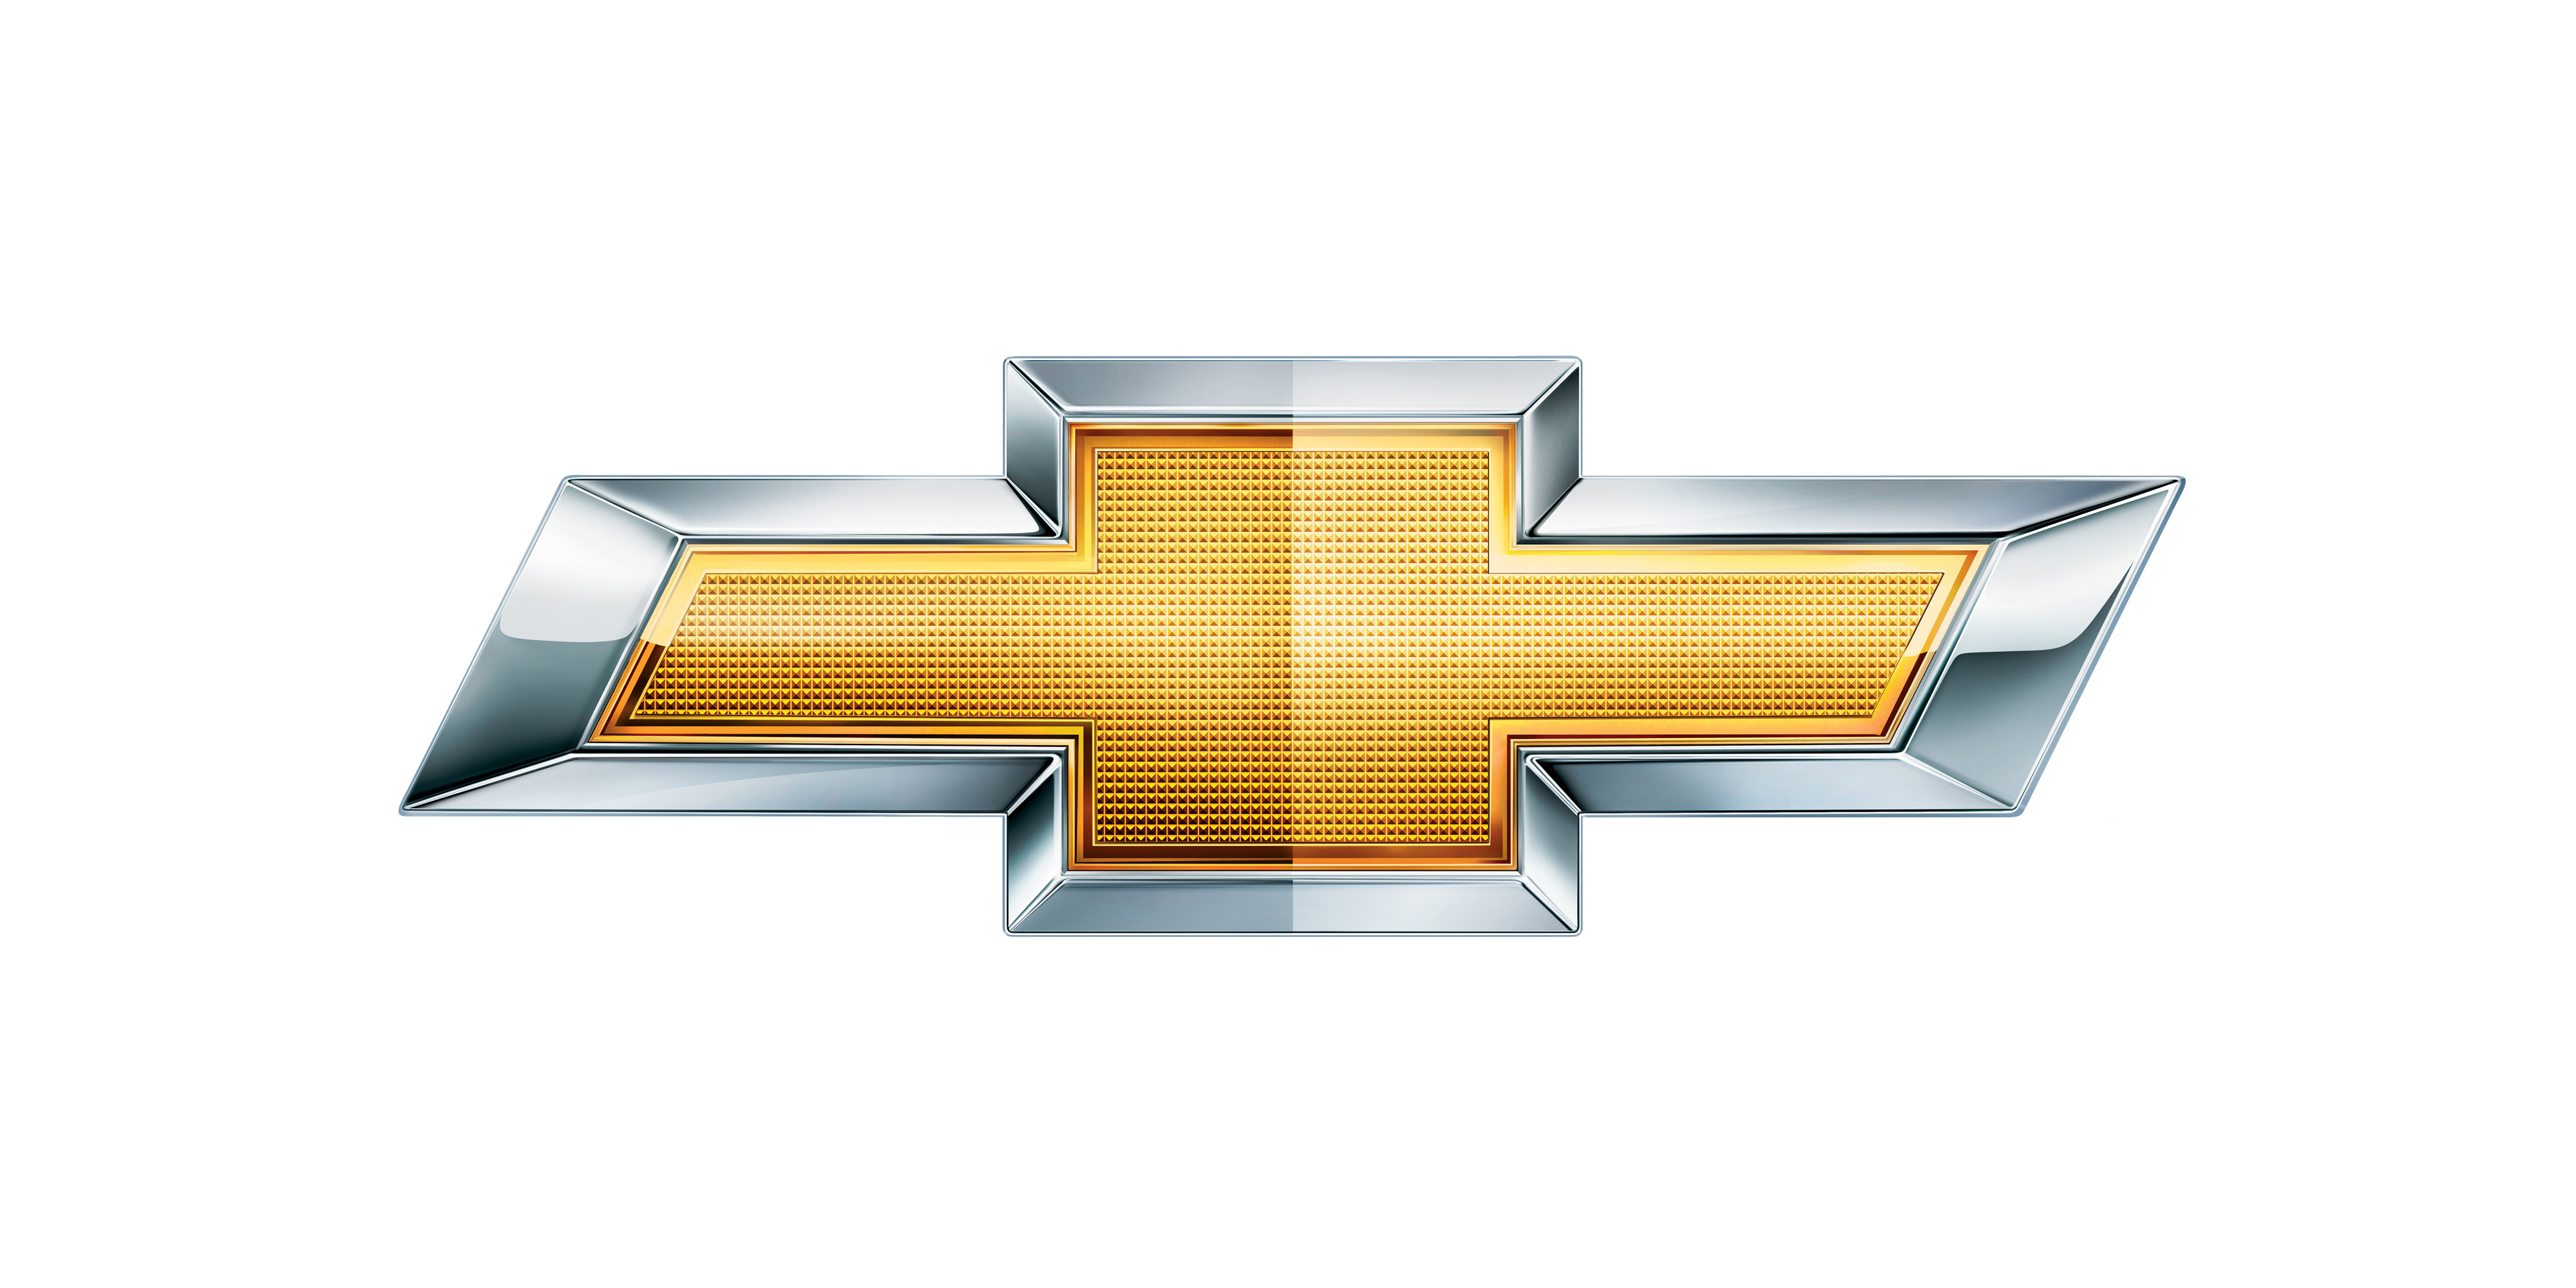 Chevy Logo, Chevrolet Car Symbol Meaning and History | Car Brand ...